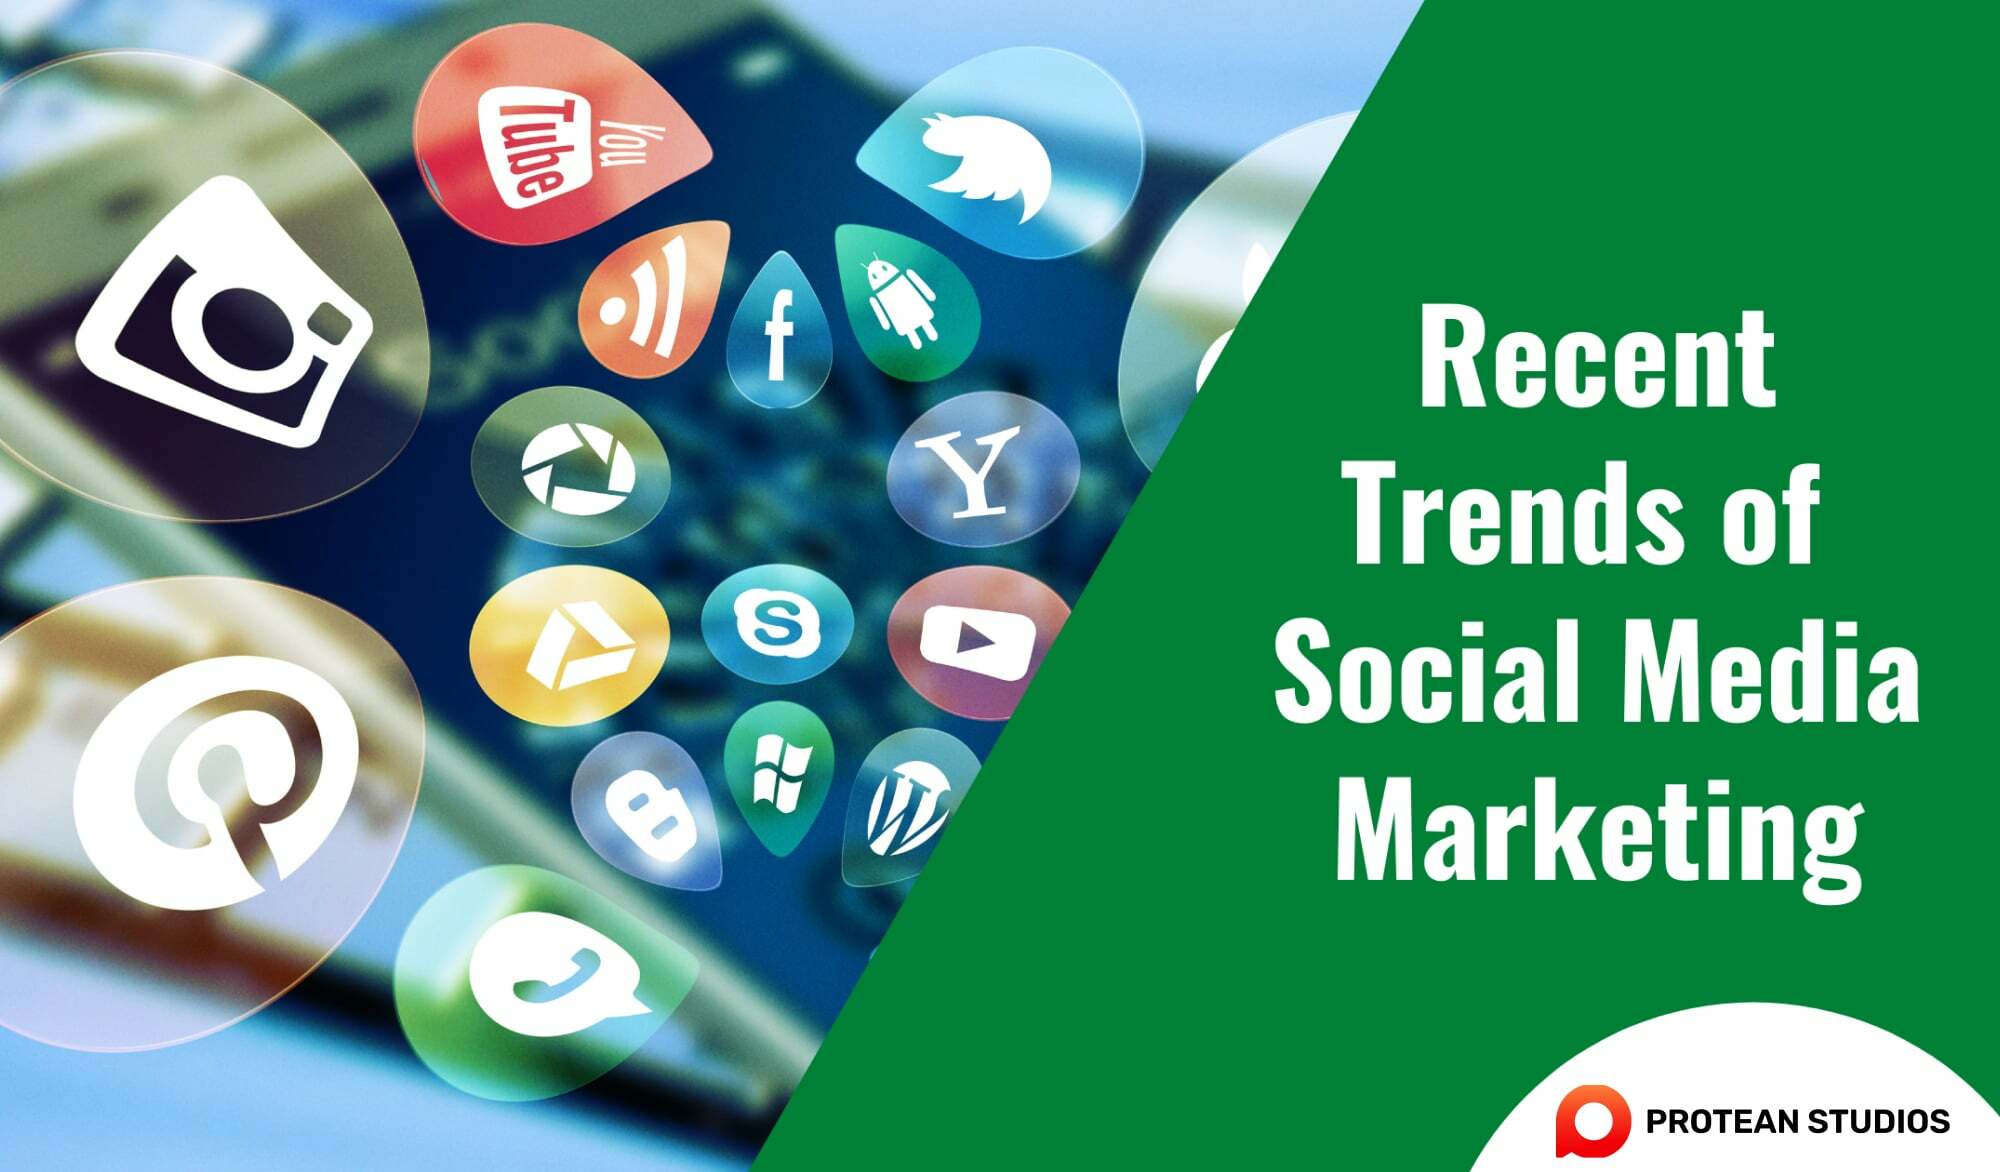 The top recent trends in social media marketing